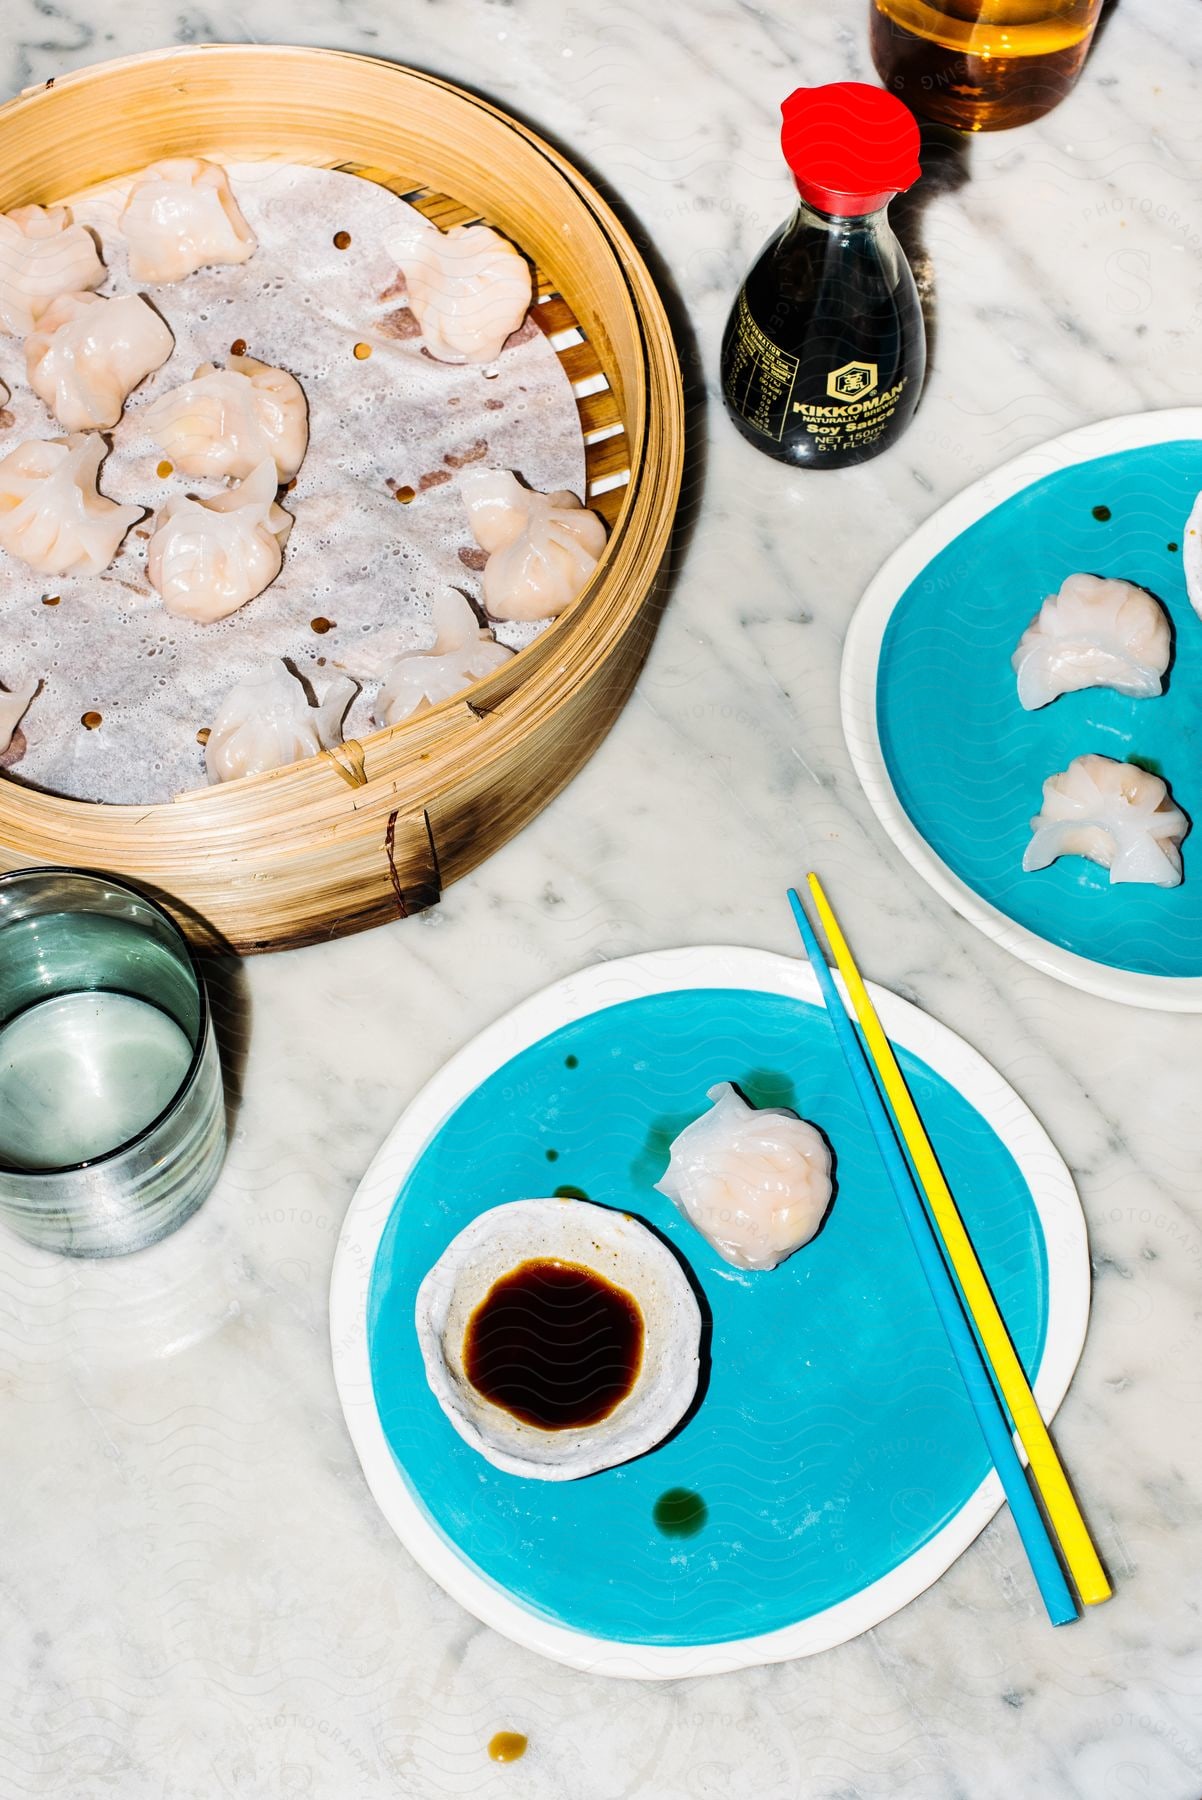 A marble table with blue and white plates of shu-mai dumplings, yellow and blue chopsticks, a bottle of soy sauce, a Chinese steam basket with more dumplings, and a glass of water.